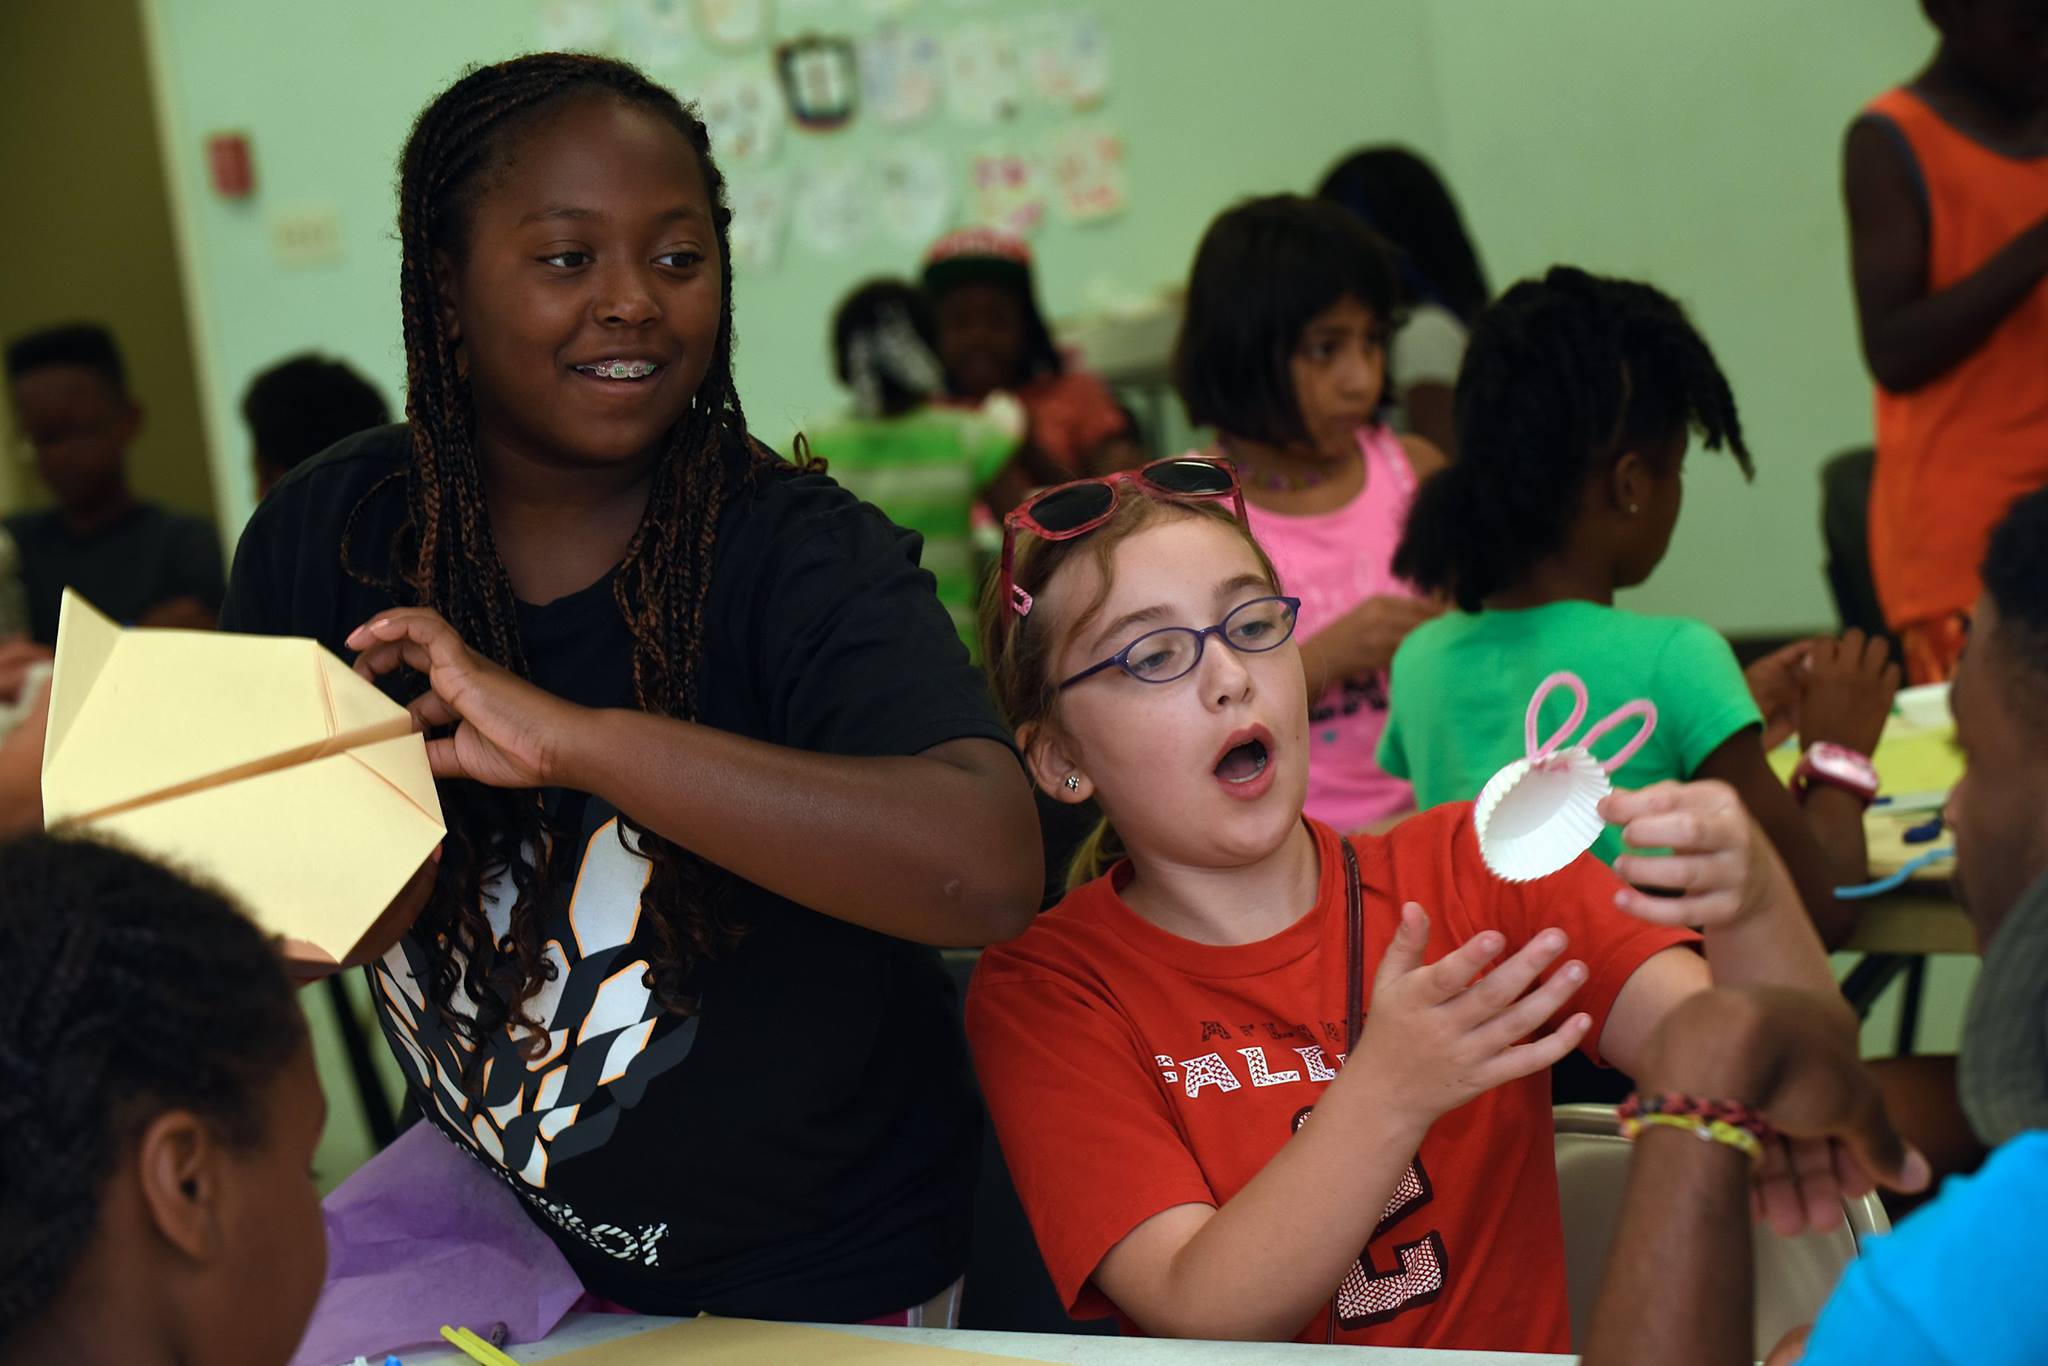 DeKalb County Recreation, Parks and Cultural Affairs to hold Mini Day Camp Friday